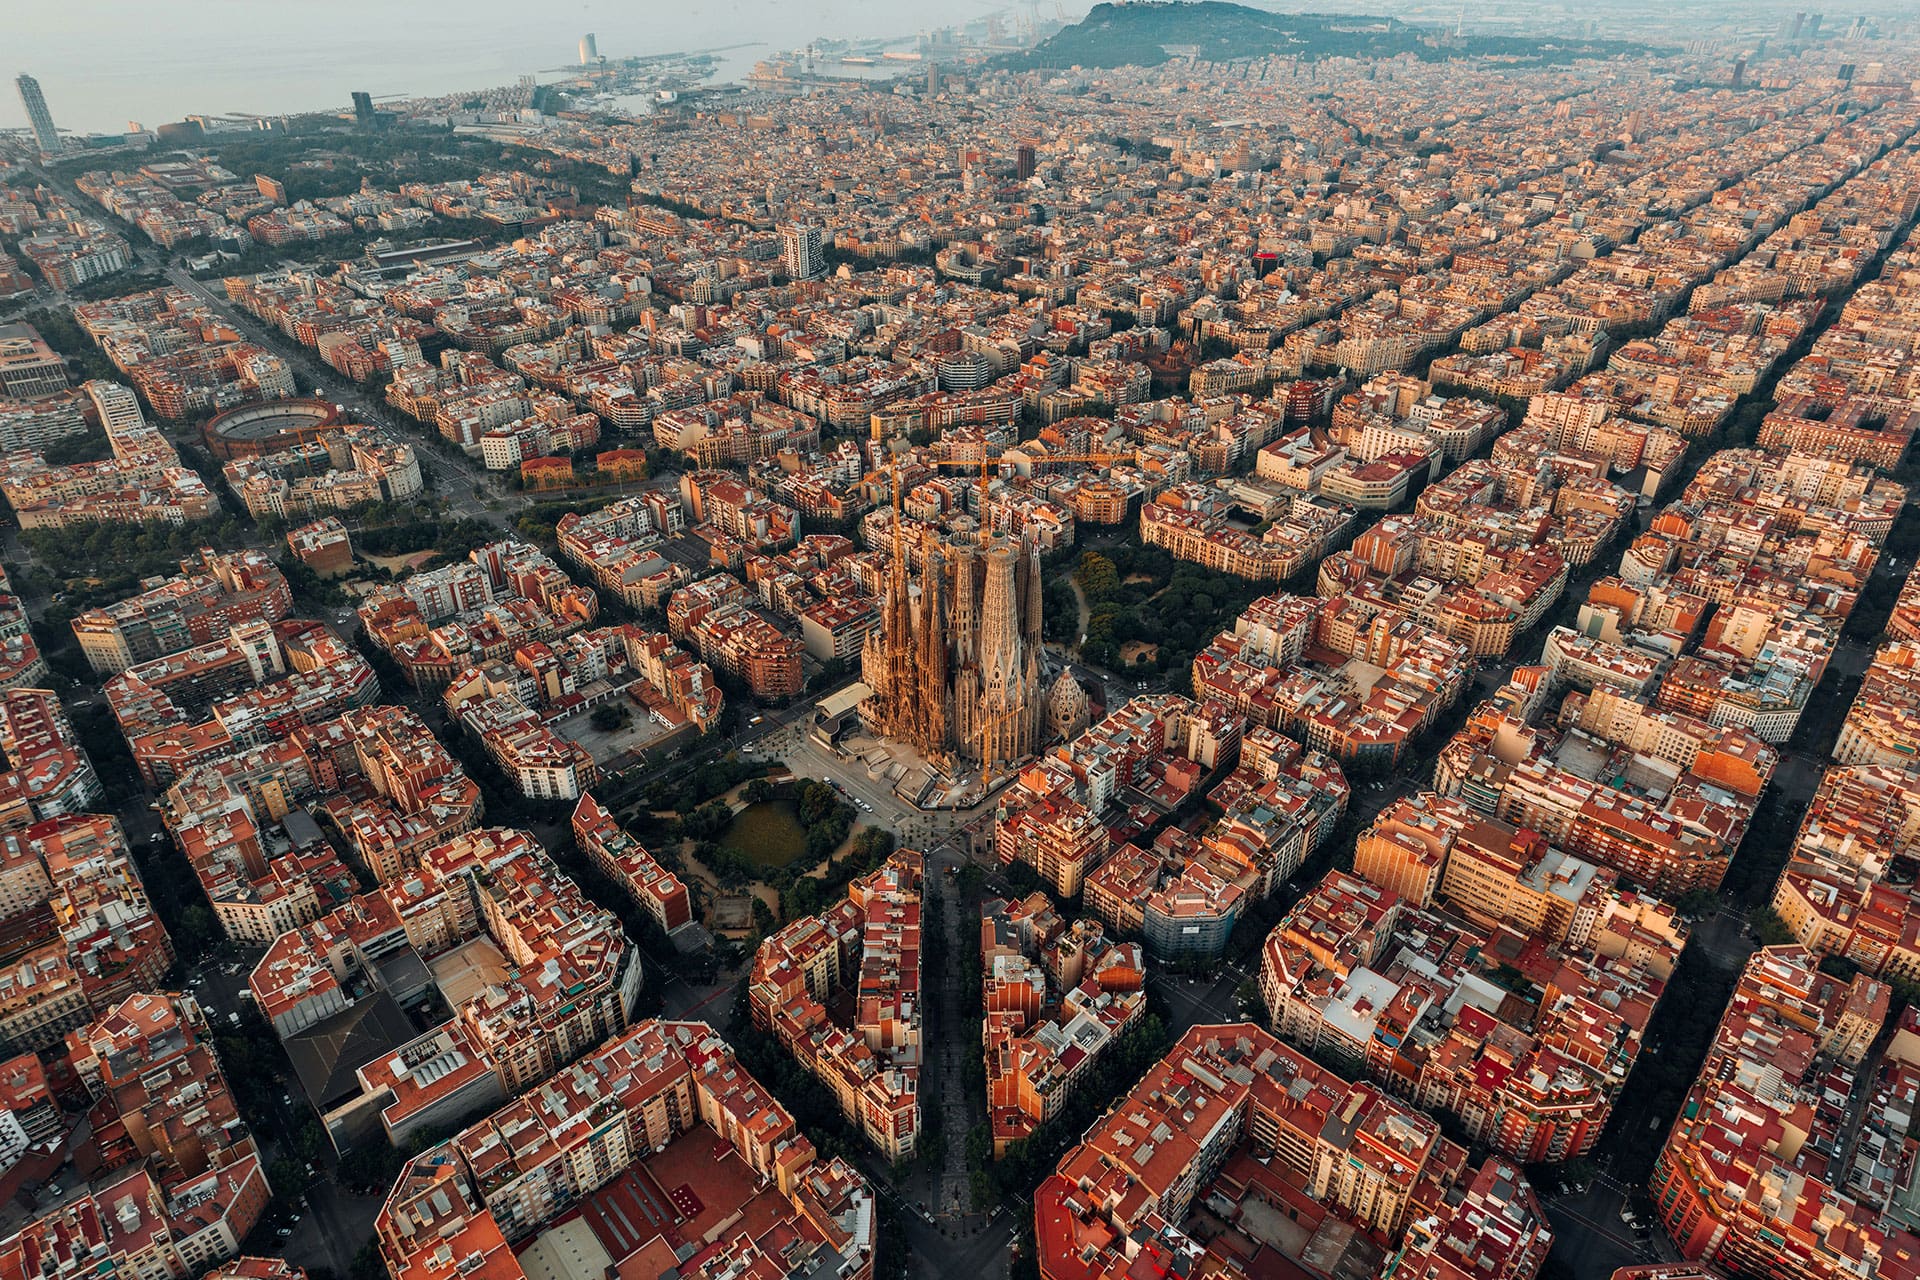 An aerial view of the city of Barcelona with the Sagrada Familia at the centre.